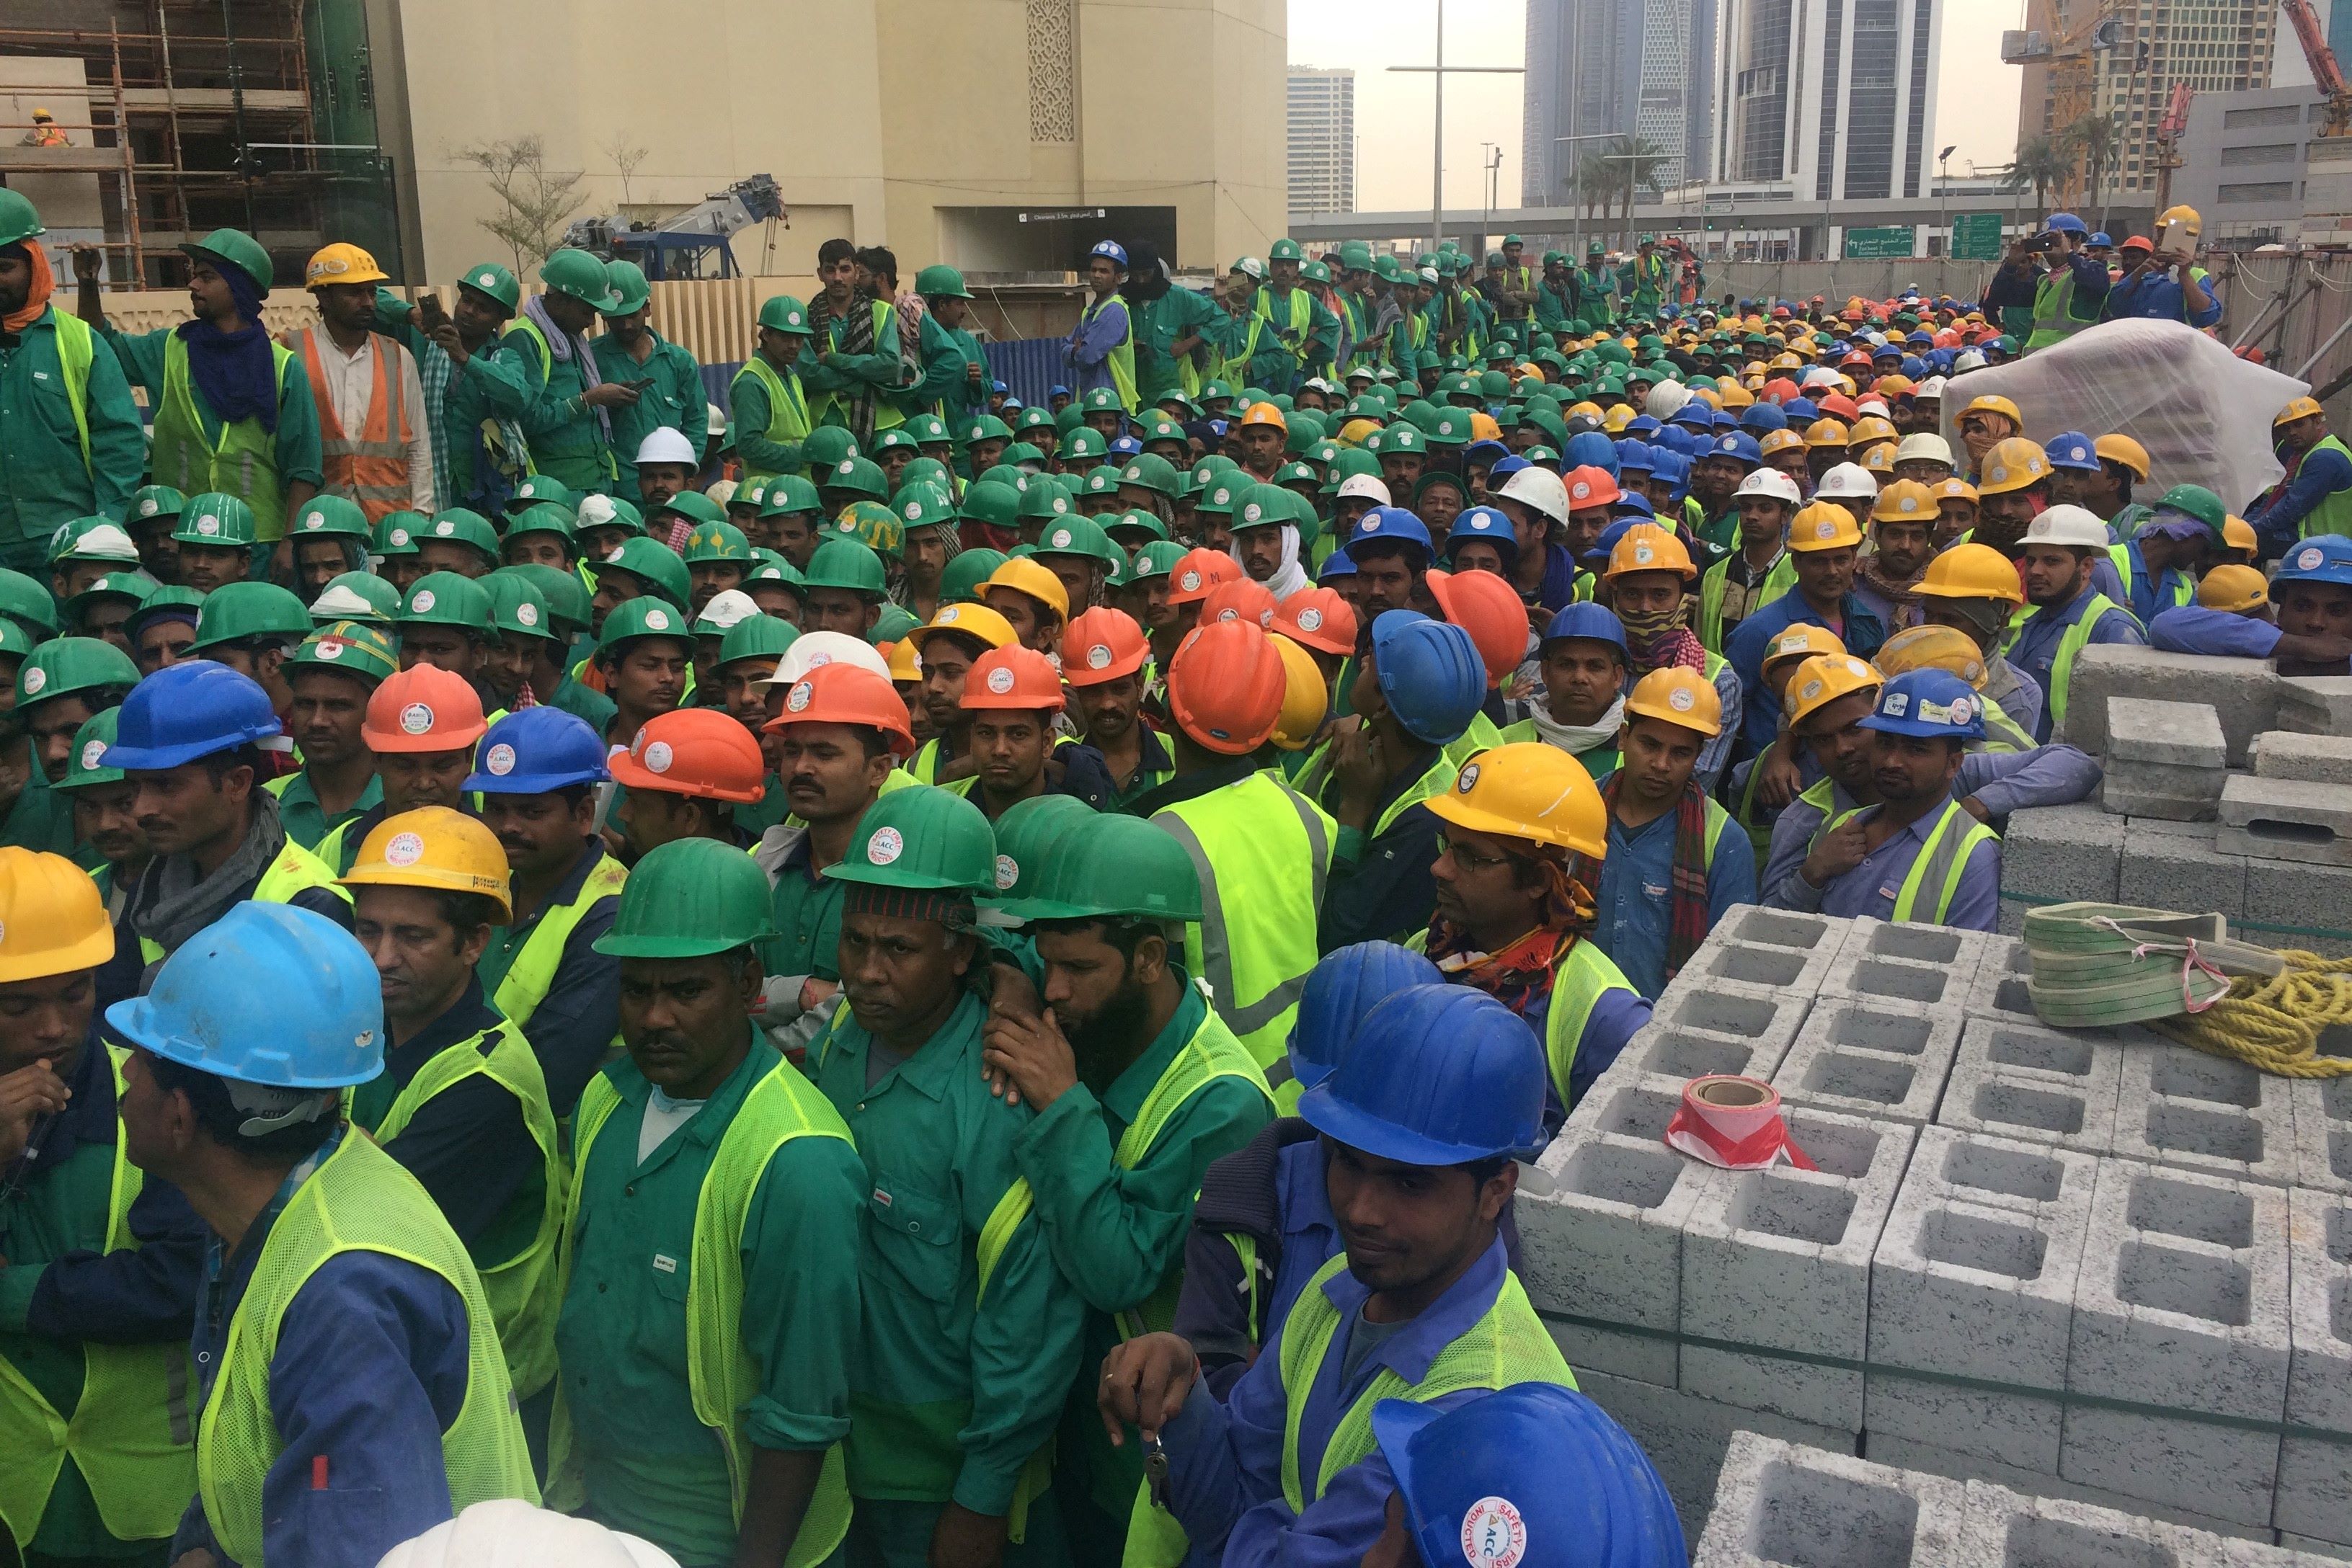 Workers of all ethnicities stand together, ready to start the long day. Their helmets denote their roles on site.